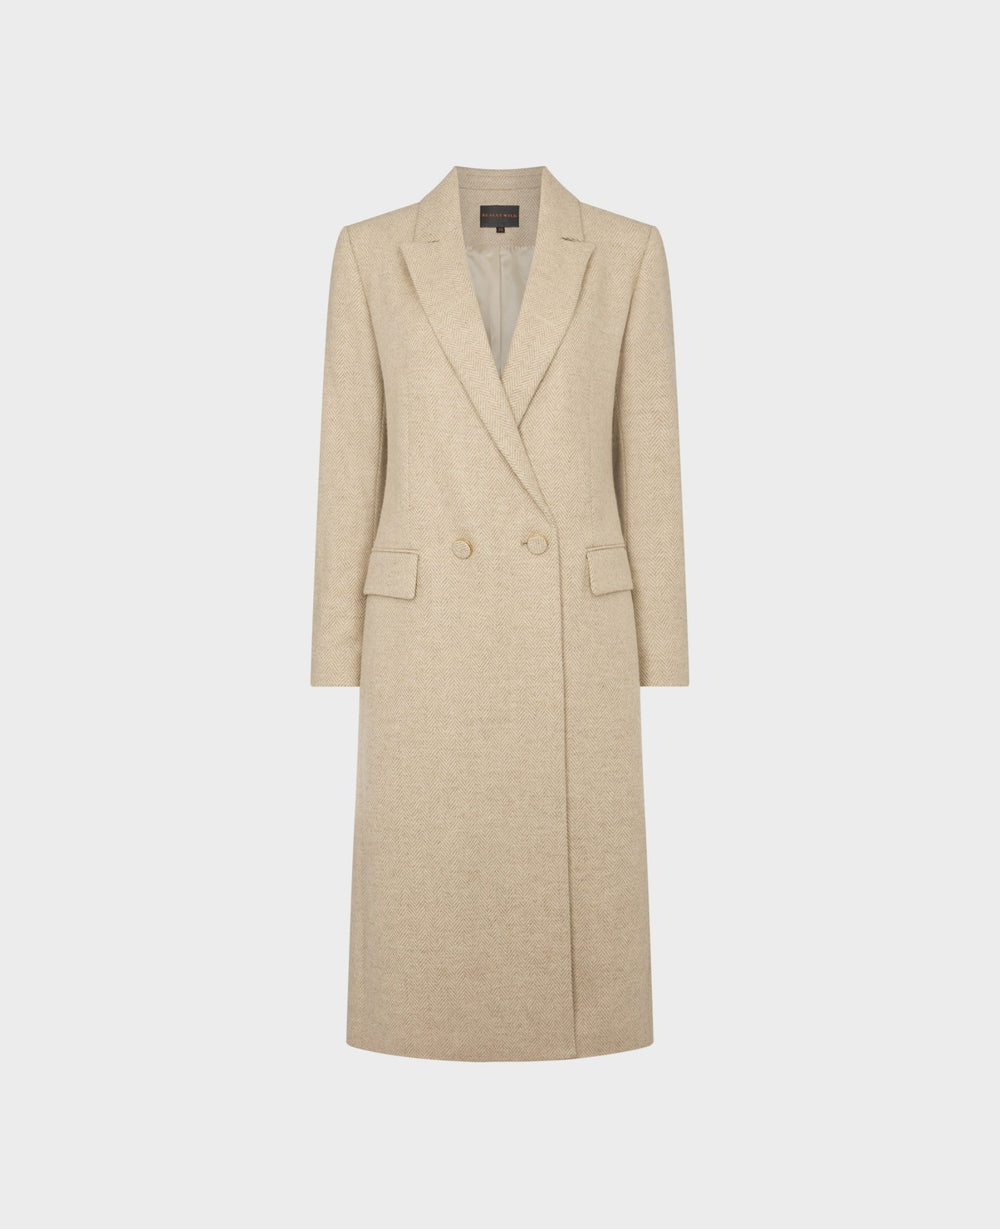 Wrap yourself in modern elegance with the Double-Breasted Wool Coat, exquisitely in 100% Luxury Scottish Lambswool. It effortlessly exudes charm, sophistication, and unparalleled style, making it a must-have addition to your autumn wardrobe.